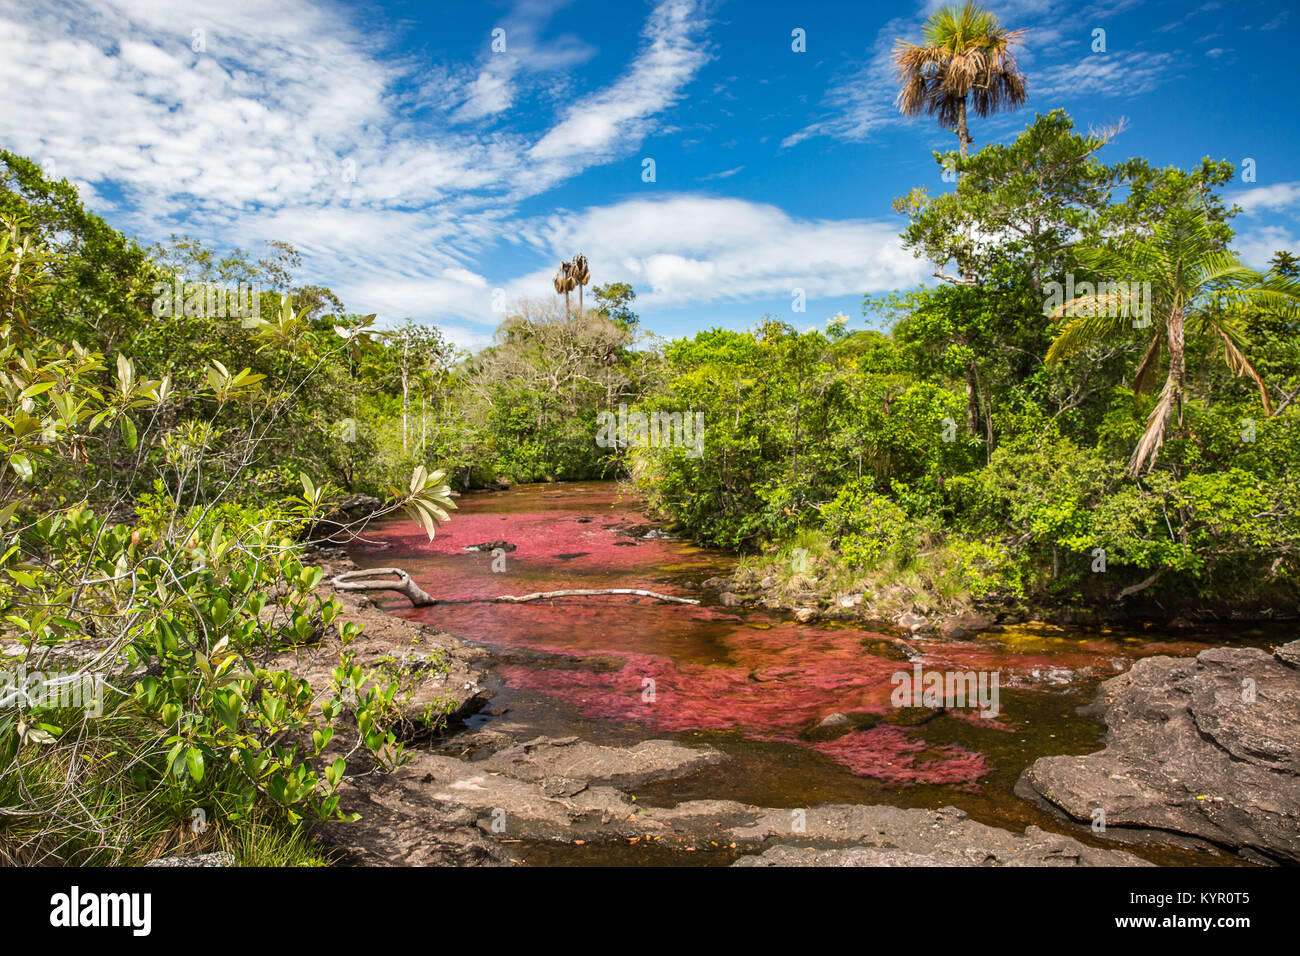 La Macarena, an isolated town in Colombia's Meta department, is famous for Caño Cristales, the River of Five Colors. Stock Photo